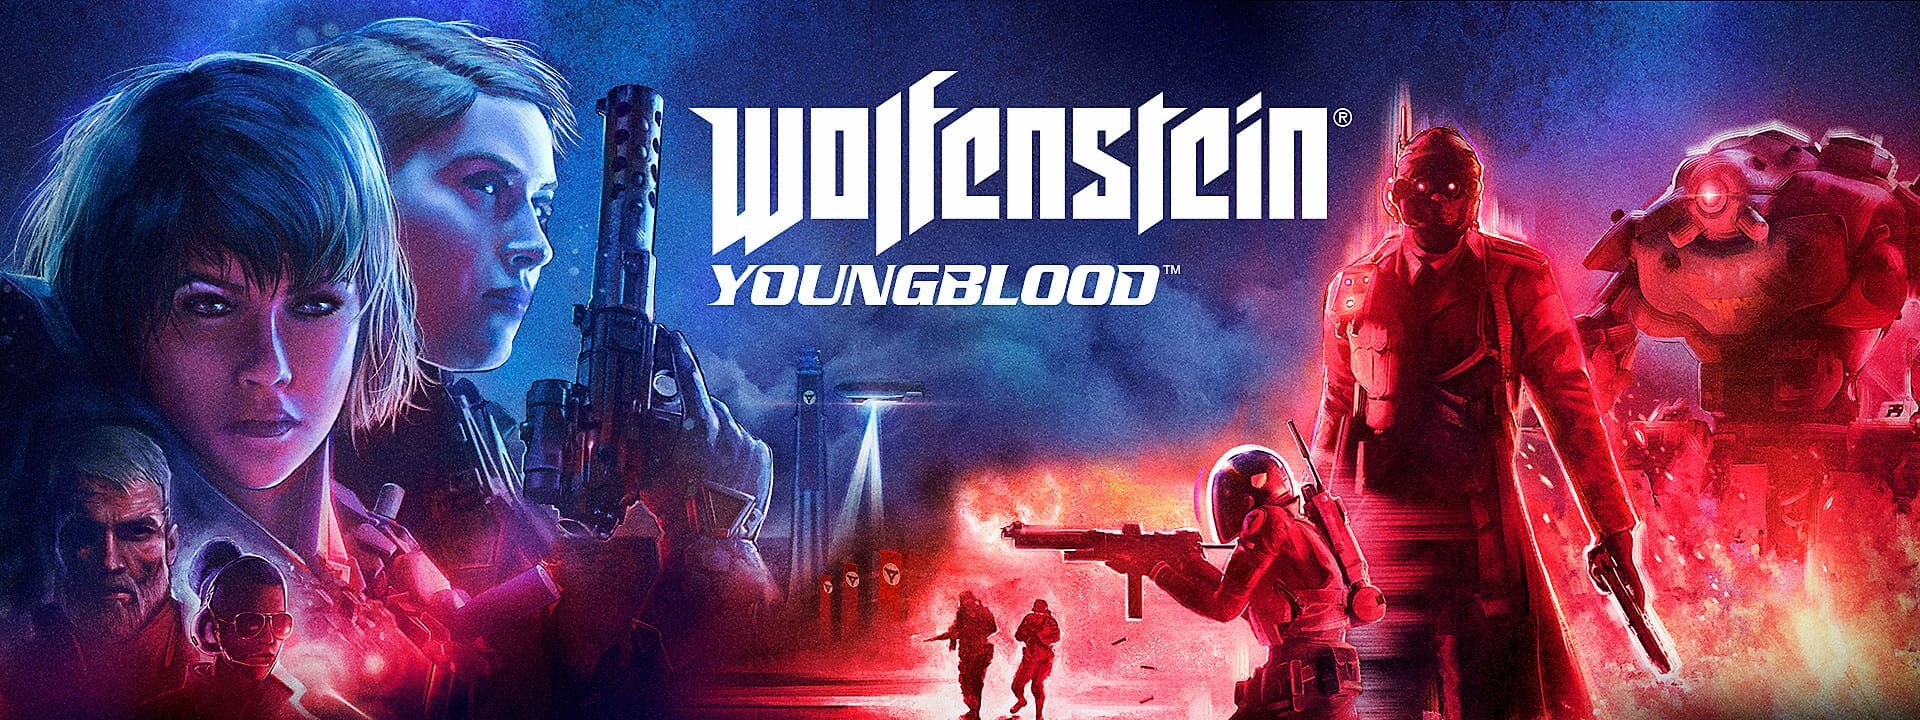 Wolfenstein Youngblood Display Issues